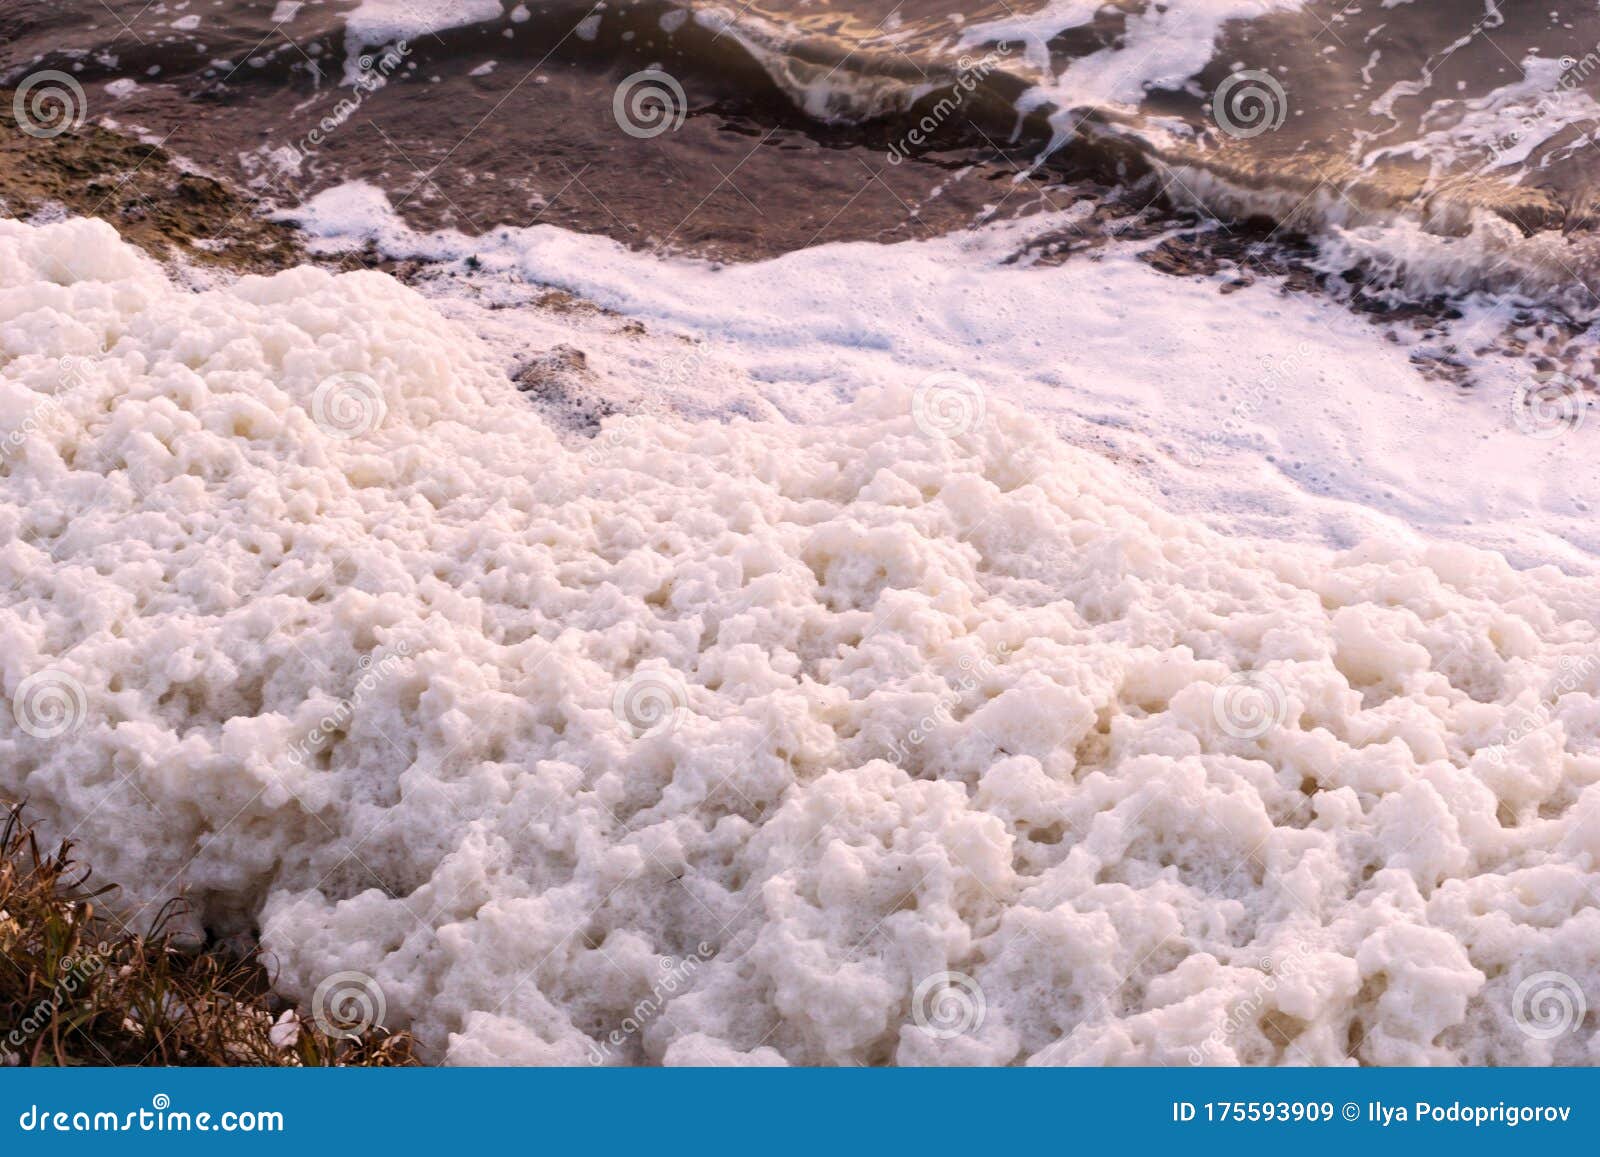 White Foam Accumulations on the Shore Near the Water Surface